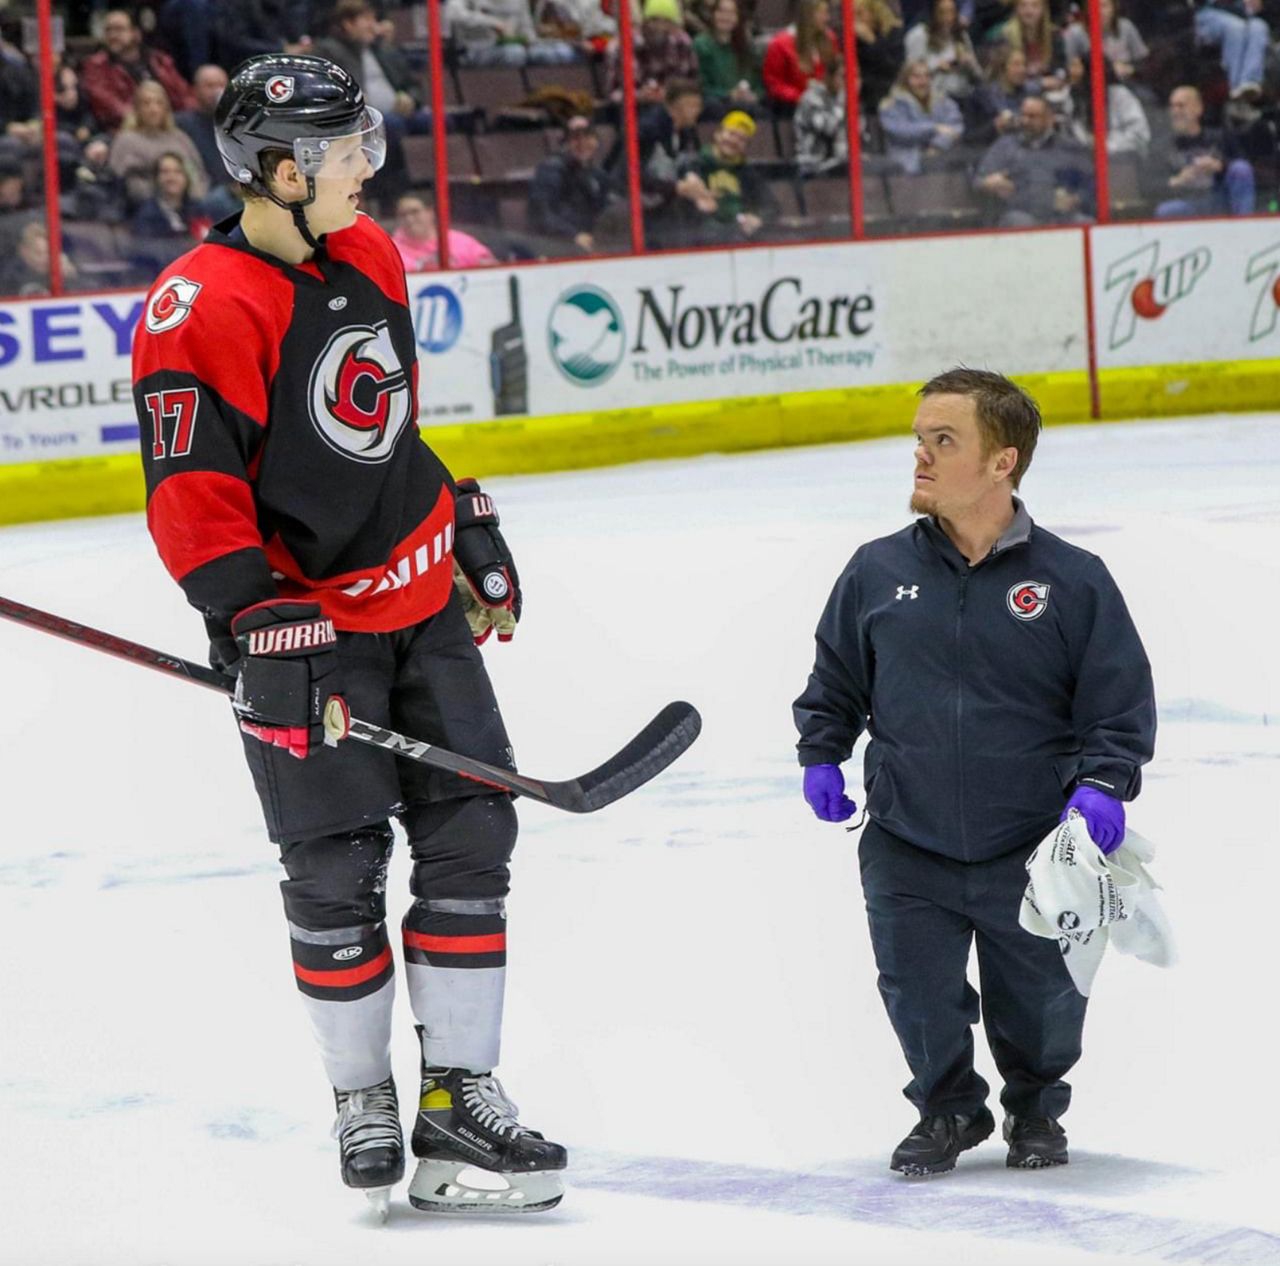 Tim Murray (right) talks to a Cincinnati Cyclones player. Murray monitors the physical health of players before, during and after games and practices. (Photo courtesy of Cincinnati Cyclones/Tony Bailey)